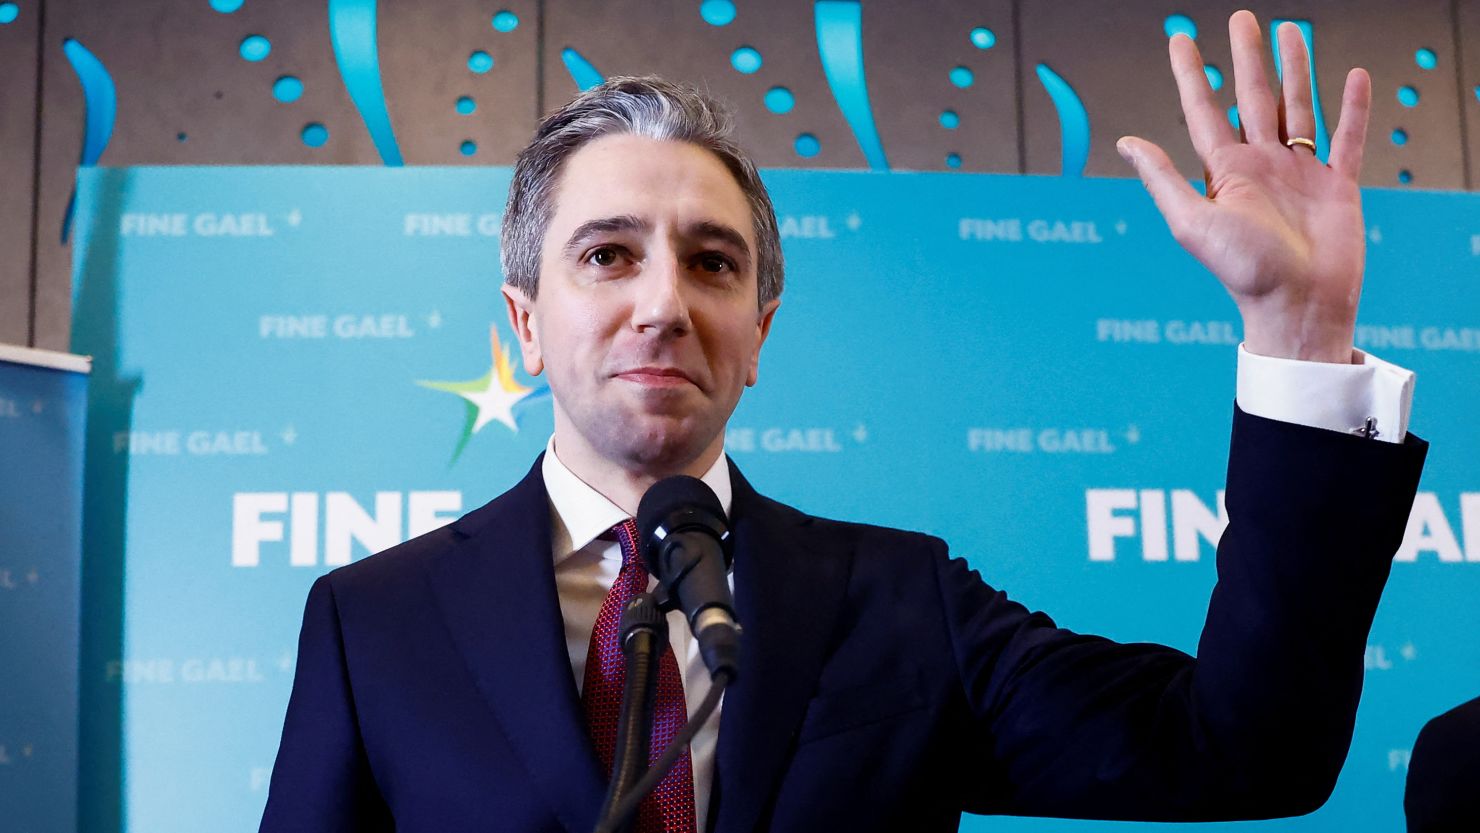 Ireland's Minister for Higher Education, Simon Harris, prepares to speak after being announced as the new leader of Fine Gael.